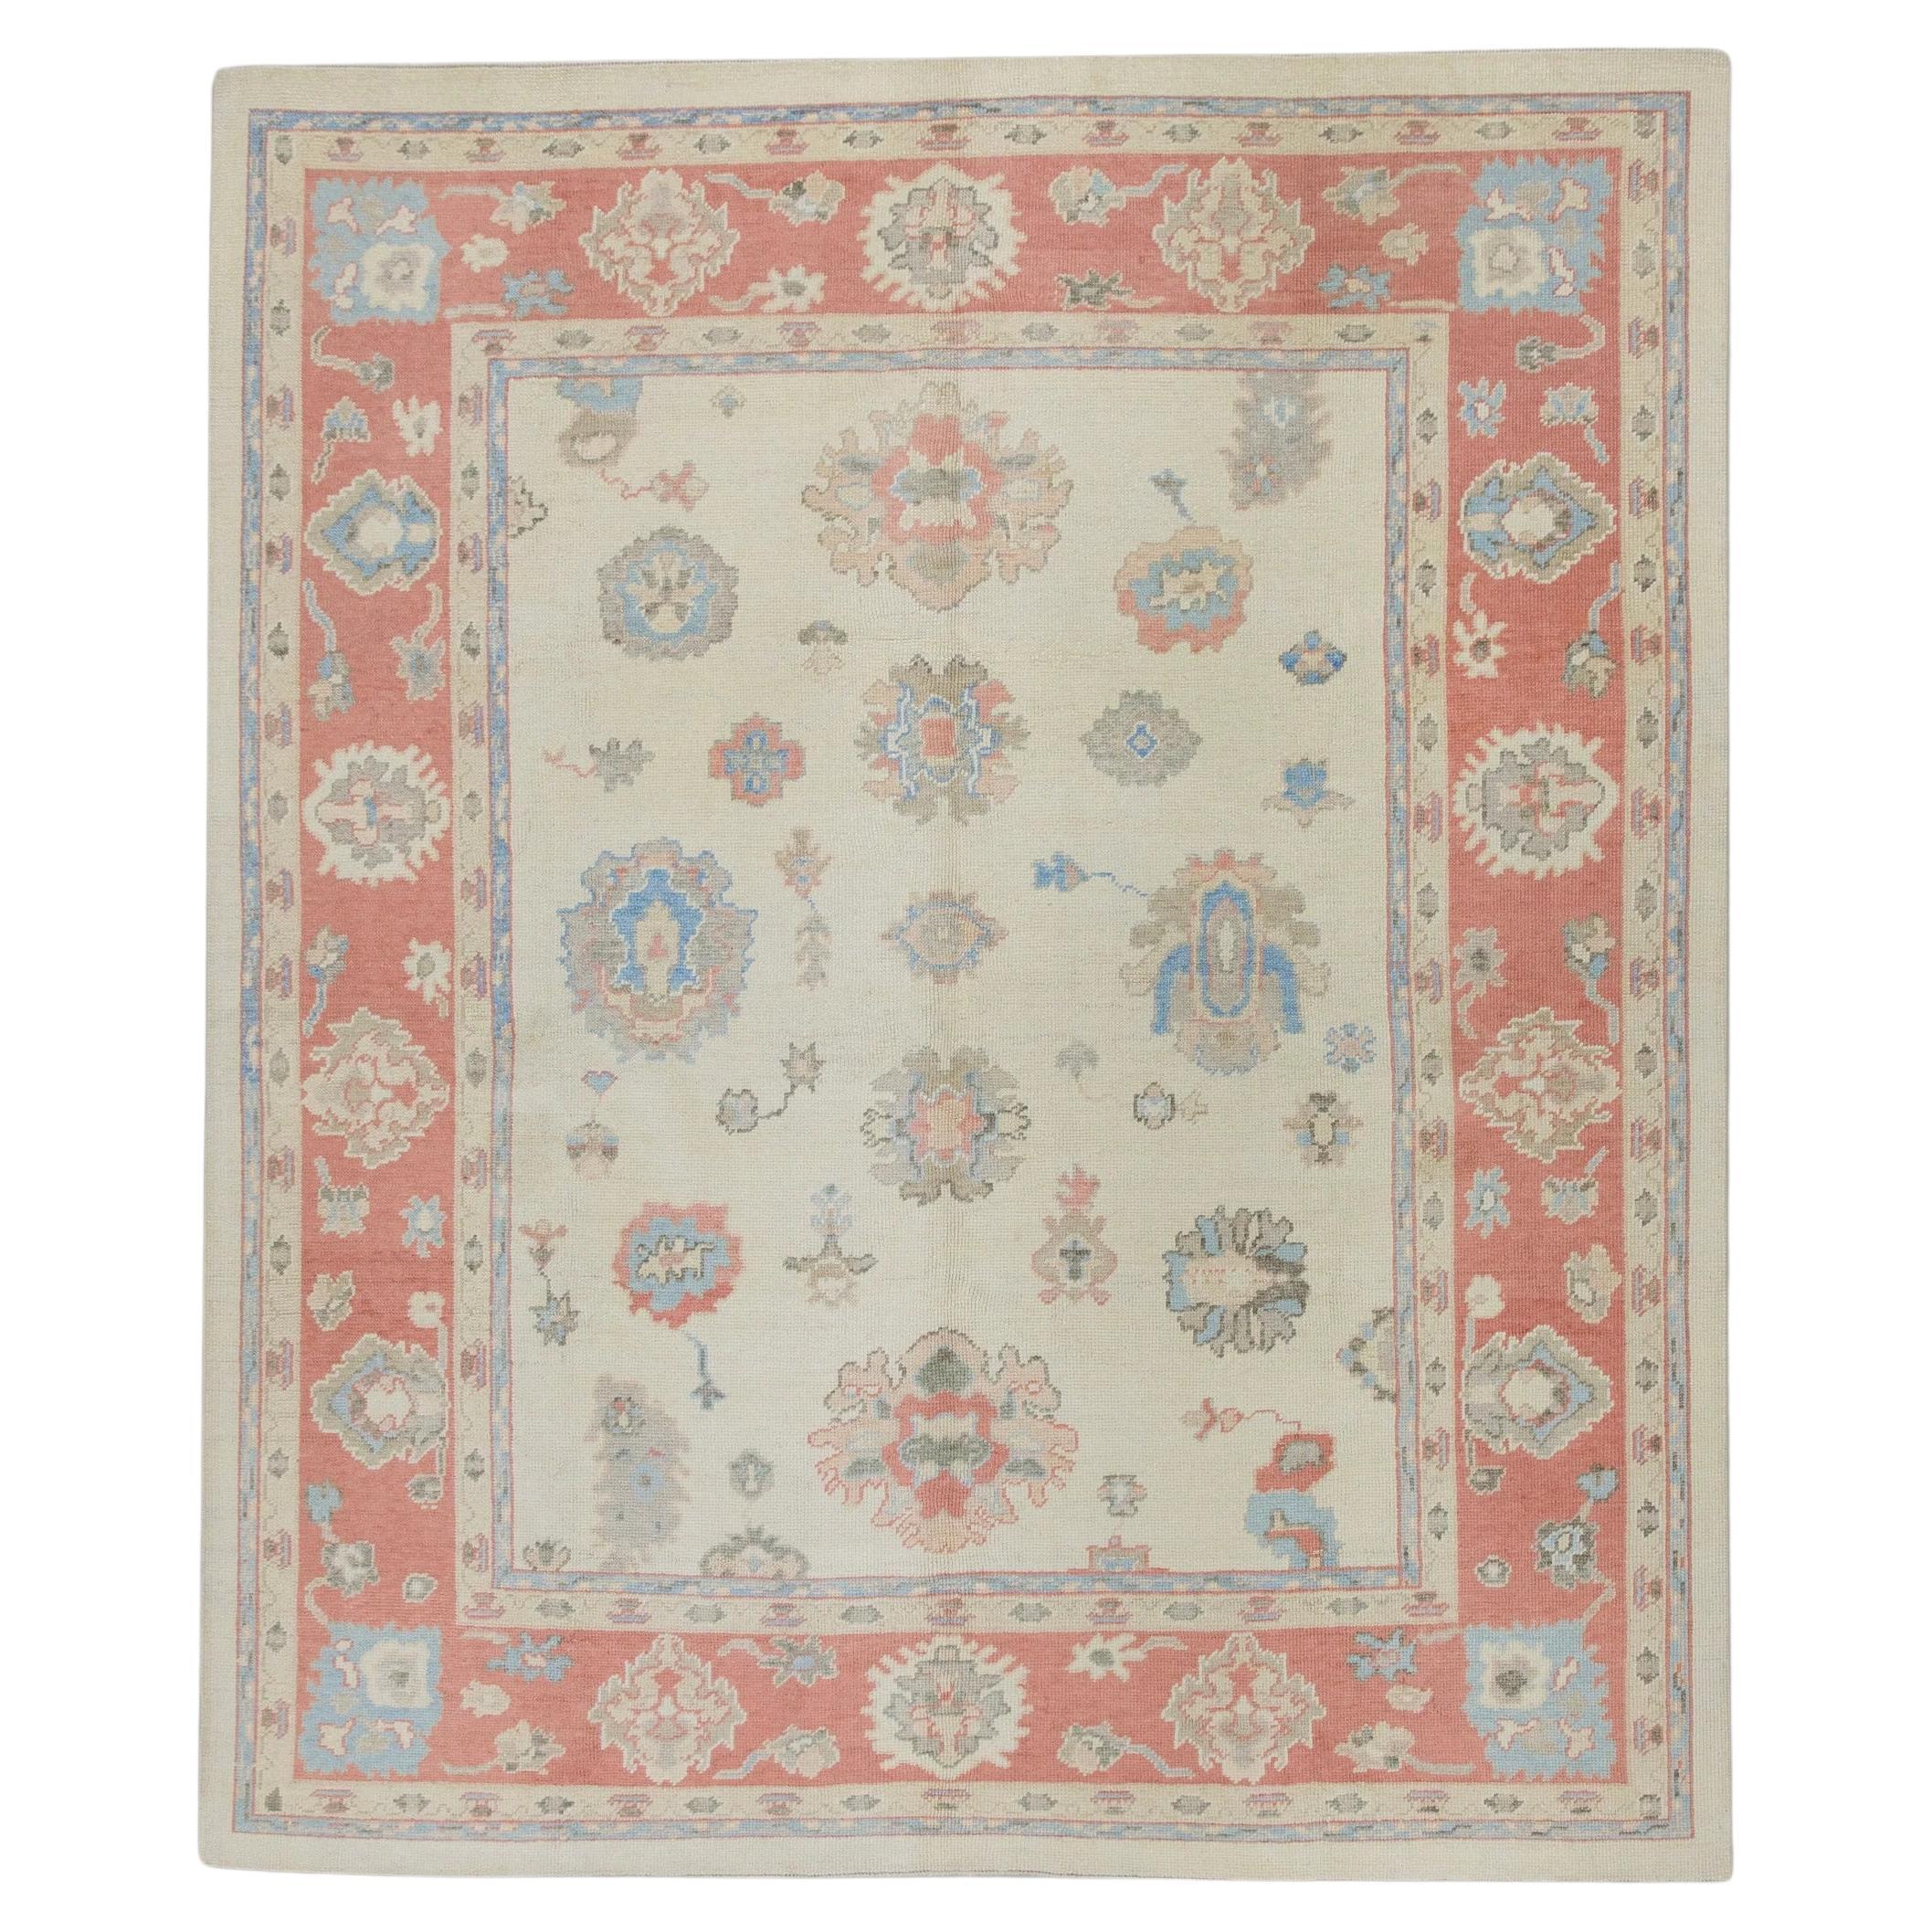 Cream Handwoven Wool Turkish Oushak Rug in Red & Blue Floral Design 8'3" x 9'9"